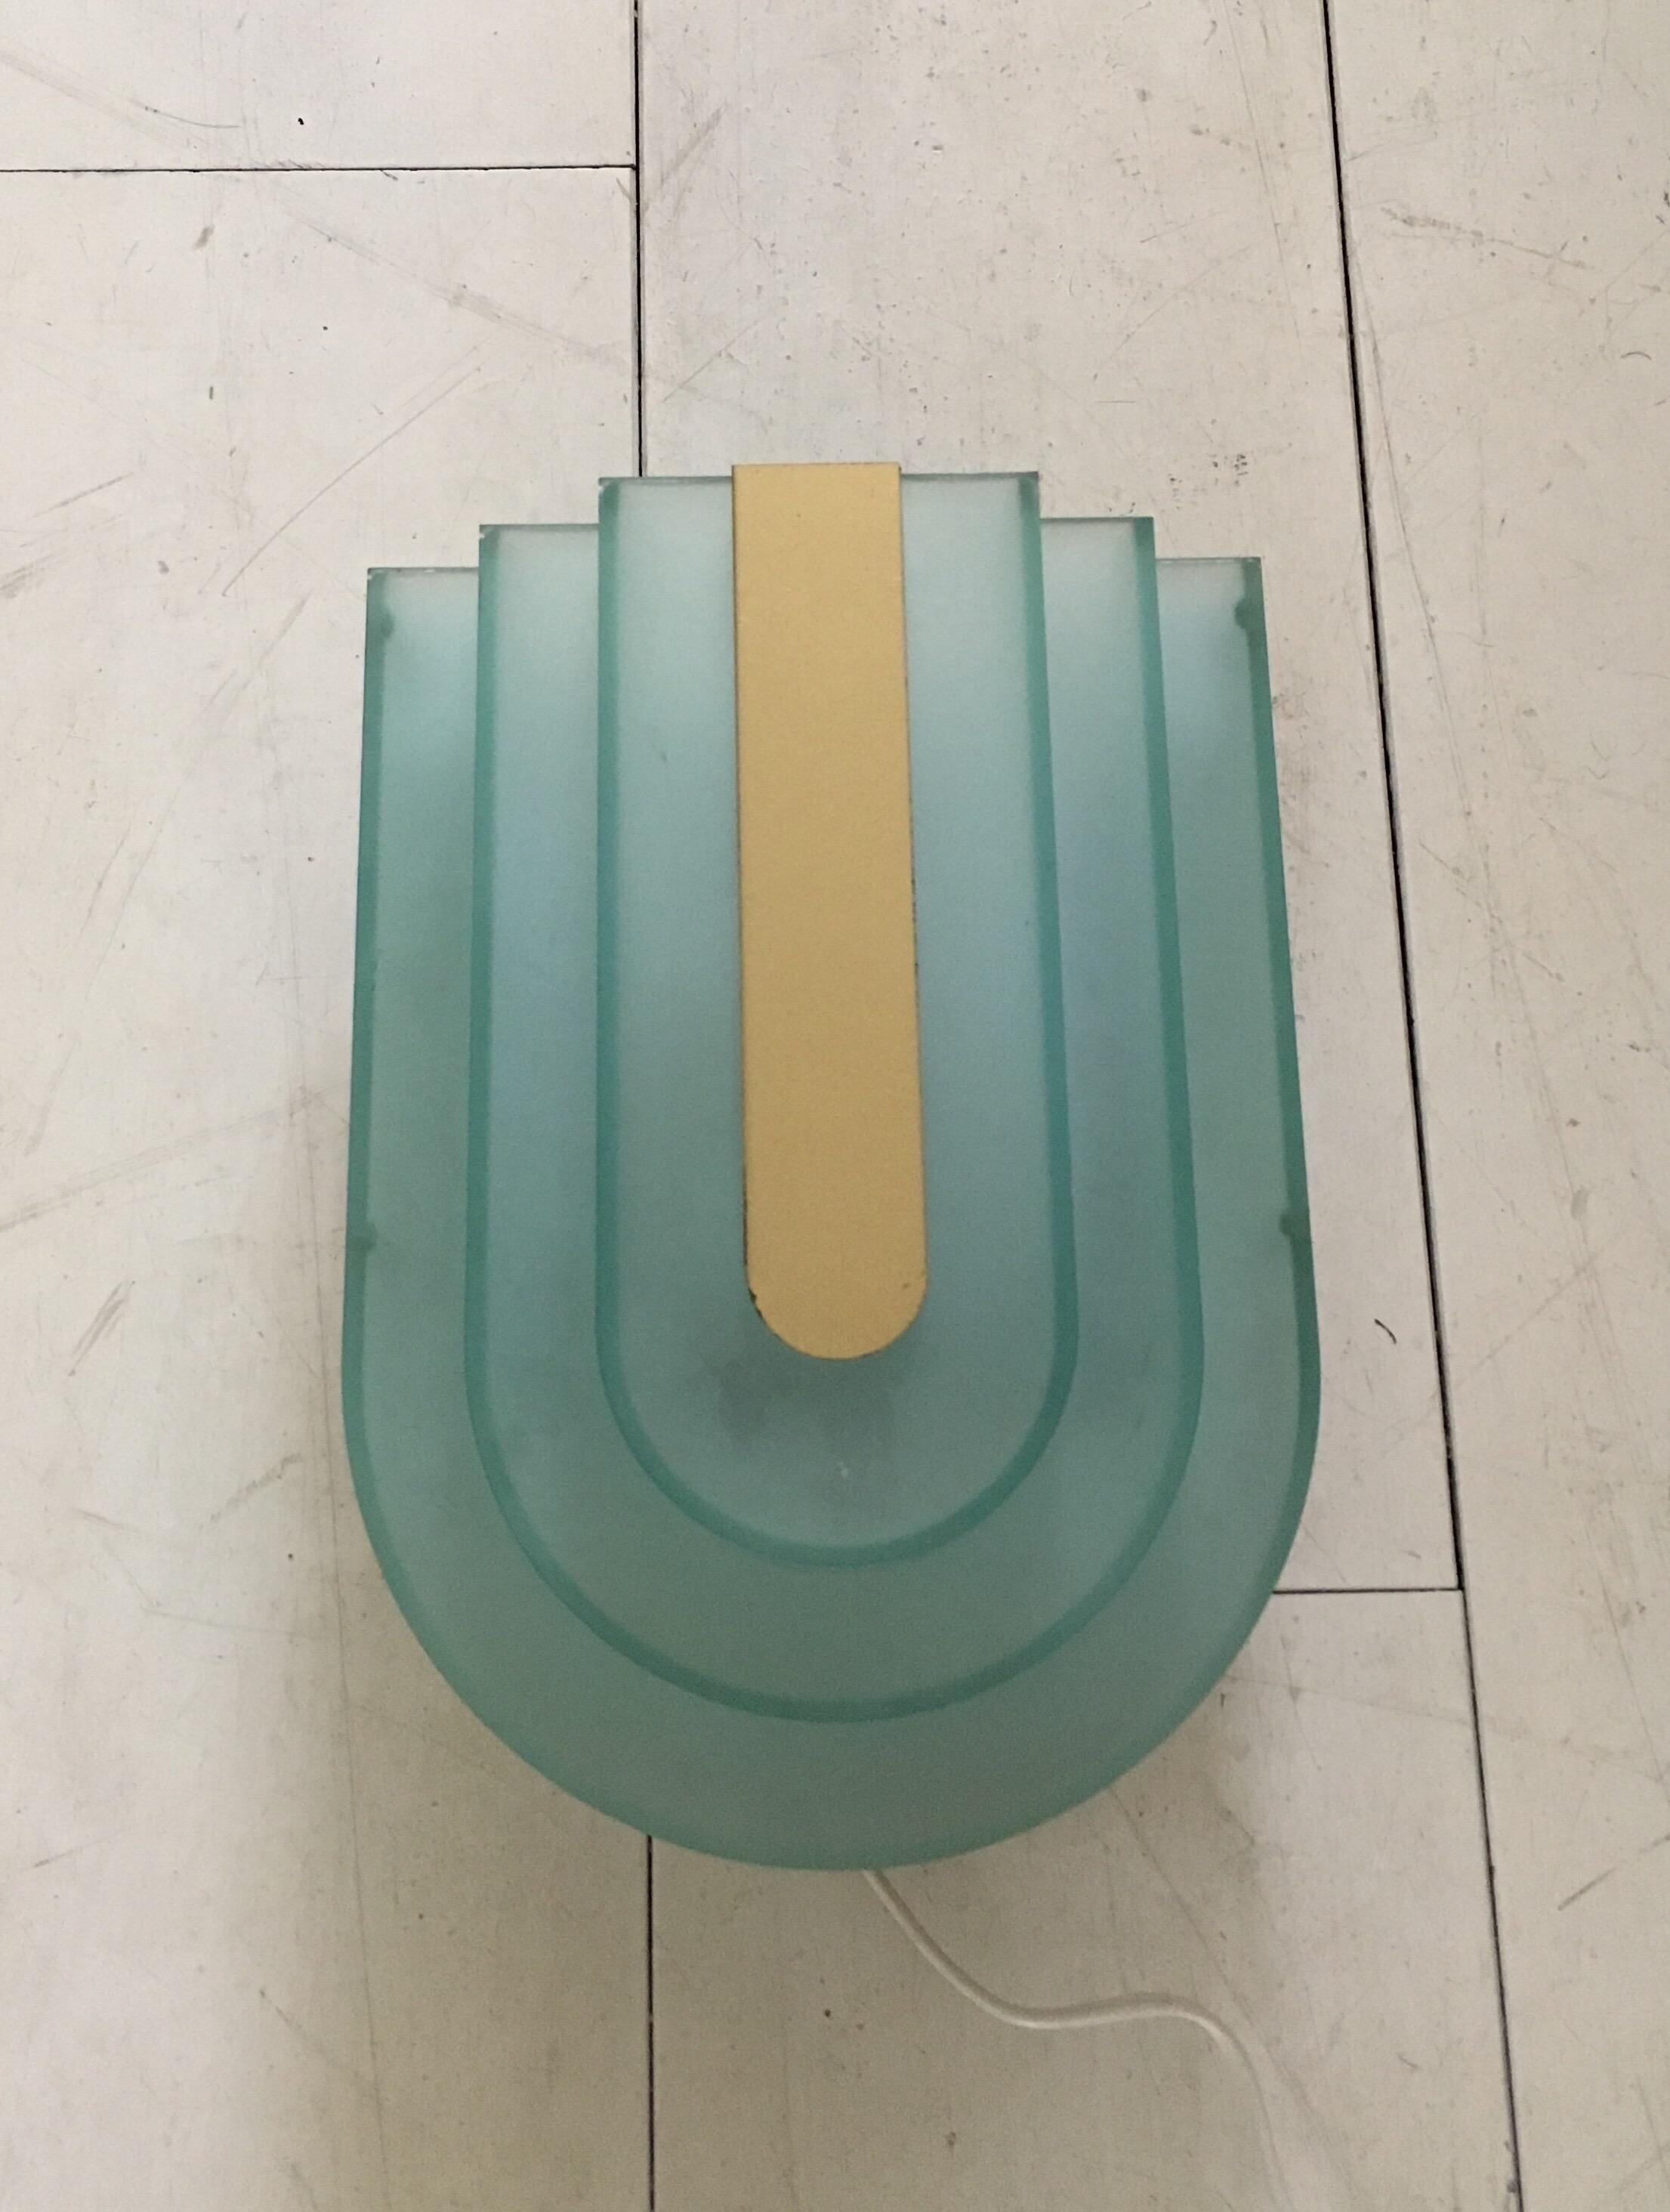 Typical piece from the 80's and very much influenced by Memphis, is this plastic and metal, aqua colored wall lamp. The plastic shade features a plastic mirror piece on top. The lamp remains in very nice condition with minor wear. It's signed